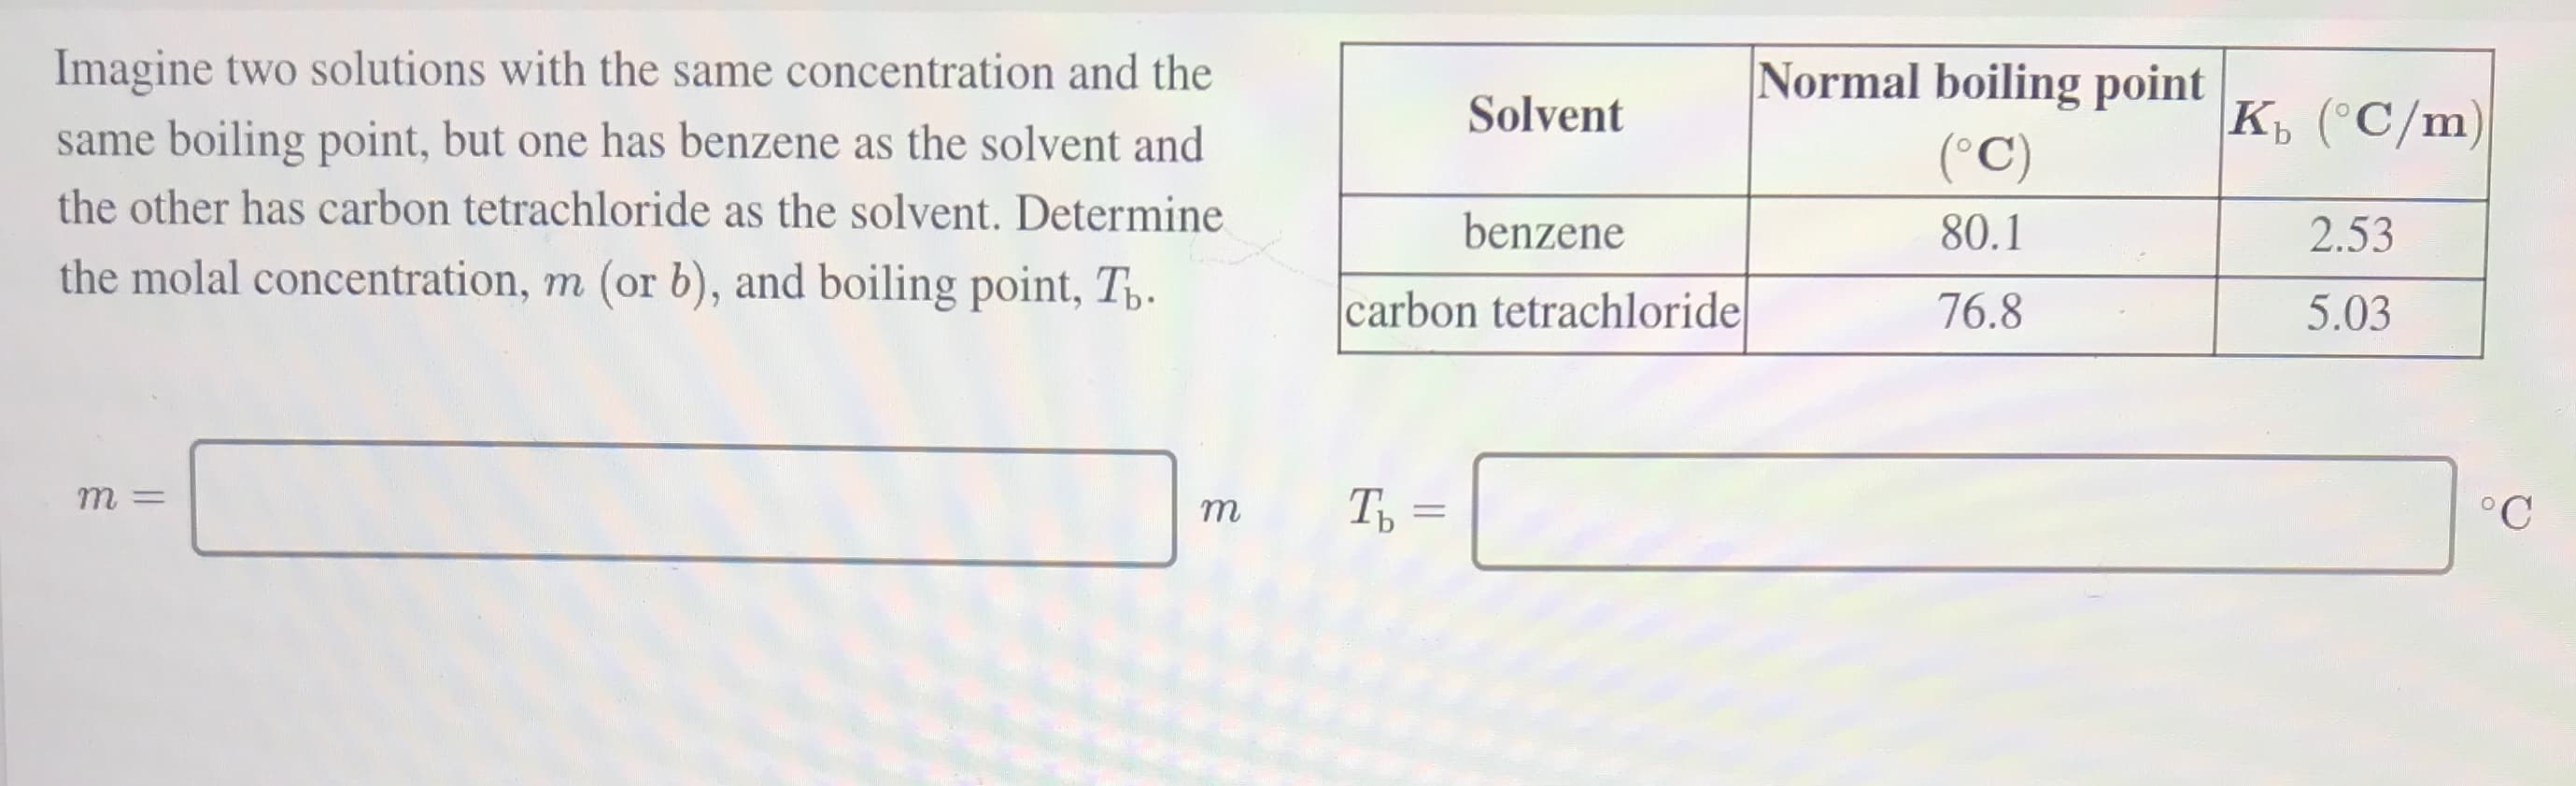 Imagine two solutions with the same concentration and the
Normal boiling point
same boiling point, but one has benzene as the solvent and
Solvent
к, (С/m)
(°C)
the other has carbon tetrachloride as the solvent. Determine
benzene
80.1
2.53
the molal concentration, m (or b), and boiling point, T,.
carbon tetrachloride
76.8
5.03
т
Ть -
||
